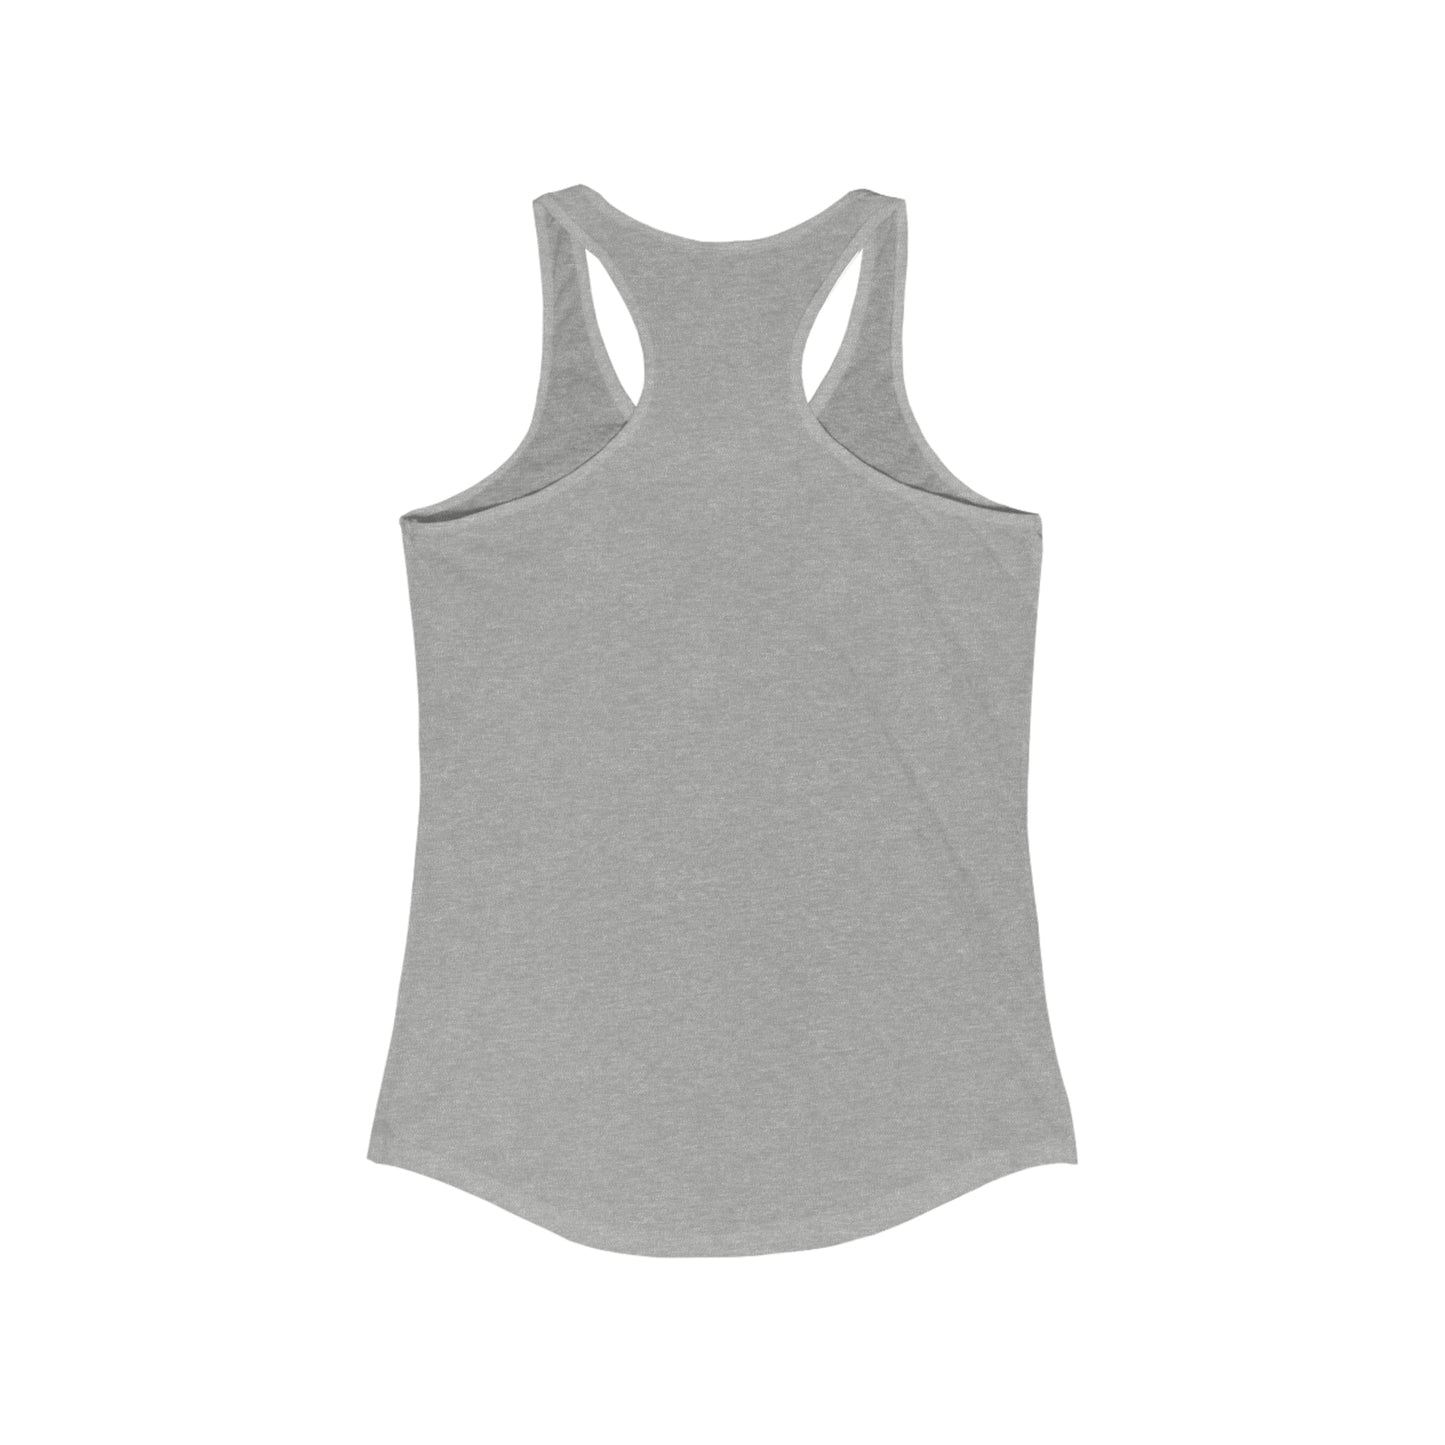 Women's  Tank Top  Ready To Live